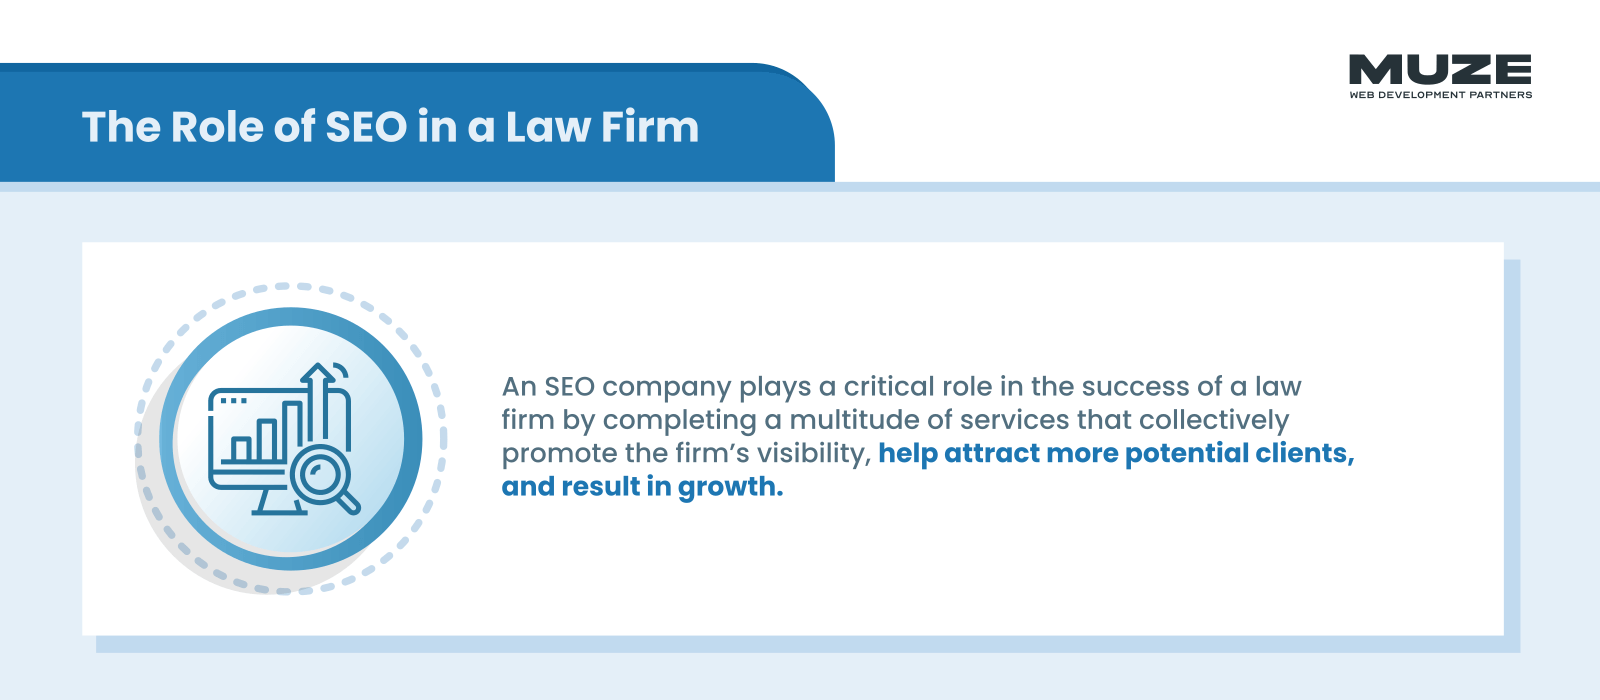 The Role of SEO in a Law Firm - Law Firm SEO Services